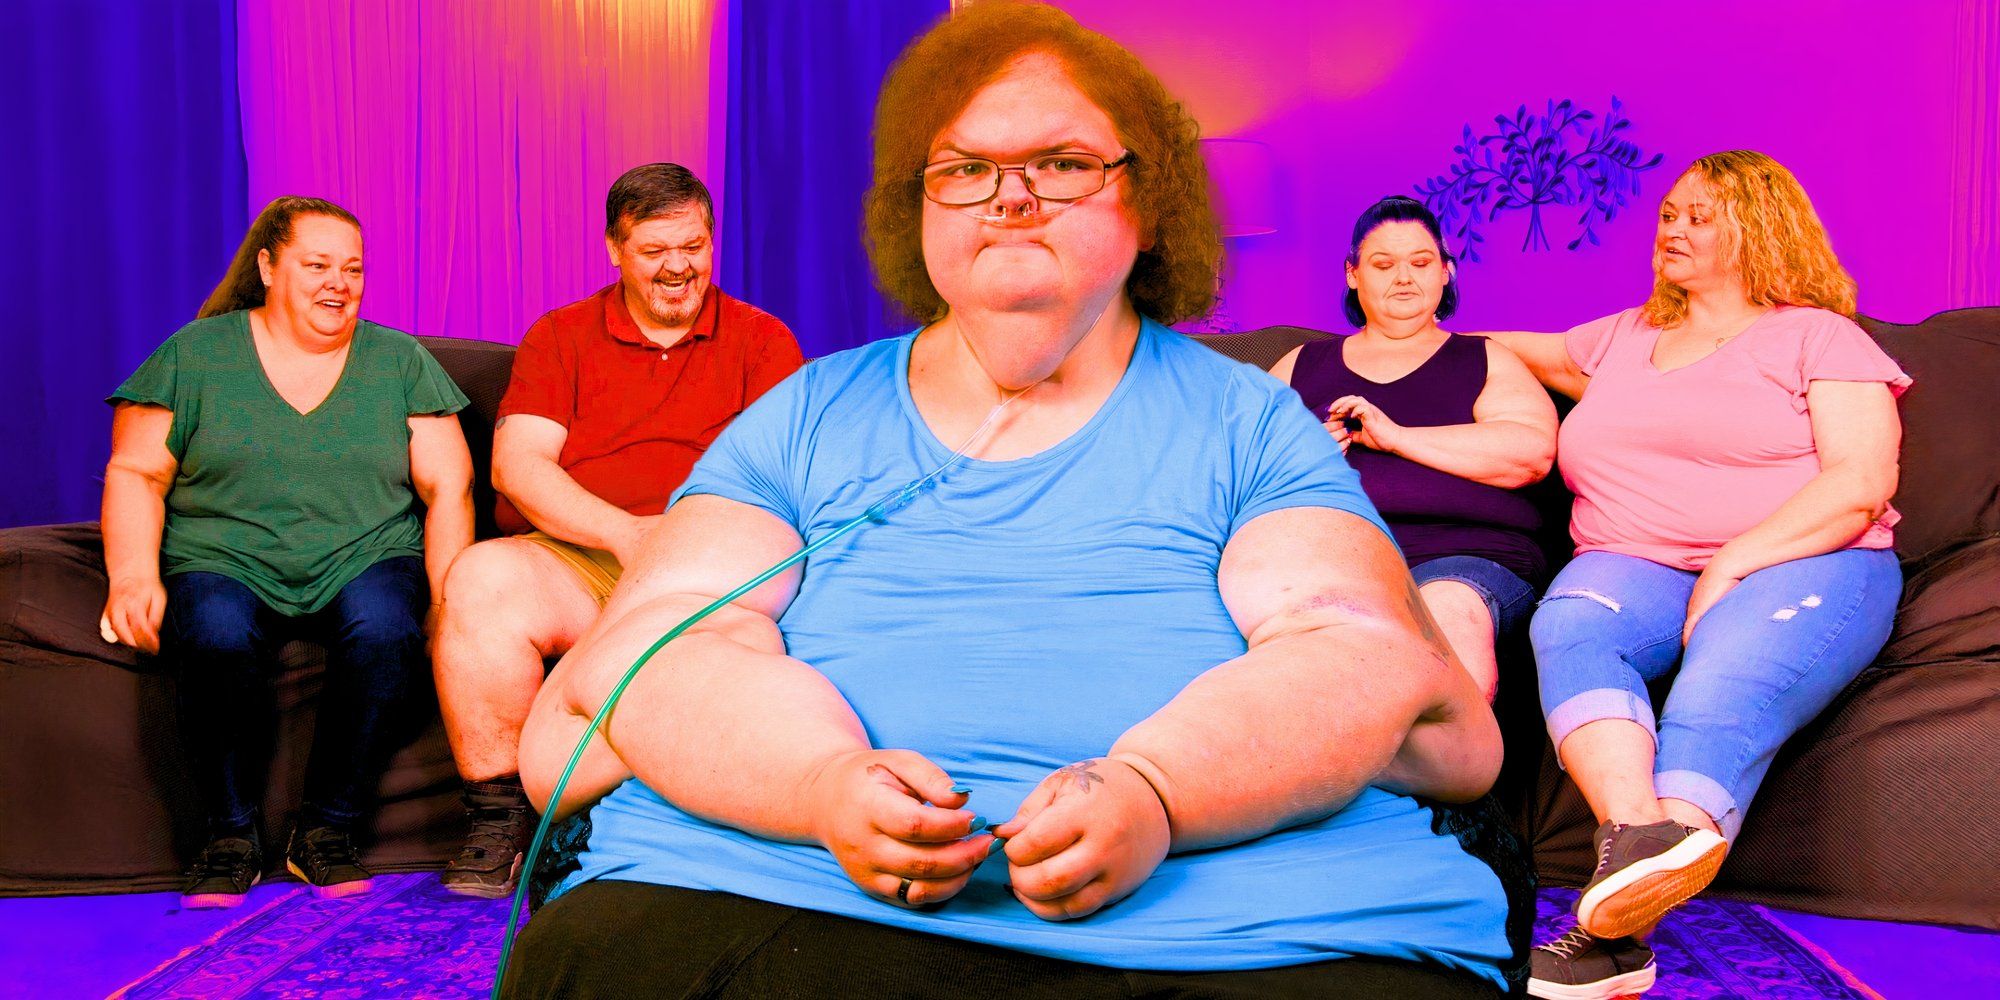  1000-Lb Sisters Season 5 cast in montage of tammy slaton with other cast members in the background on a couch